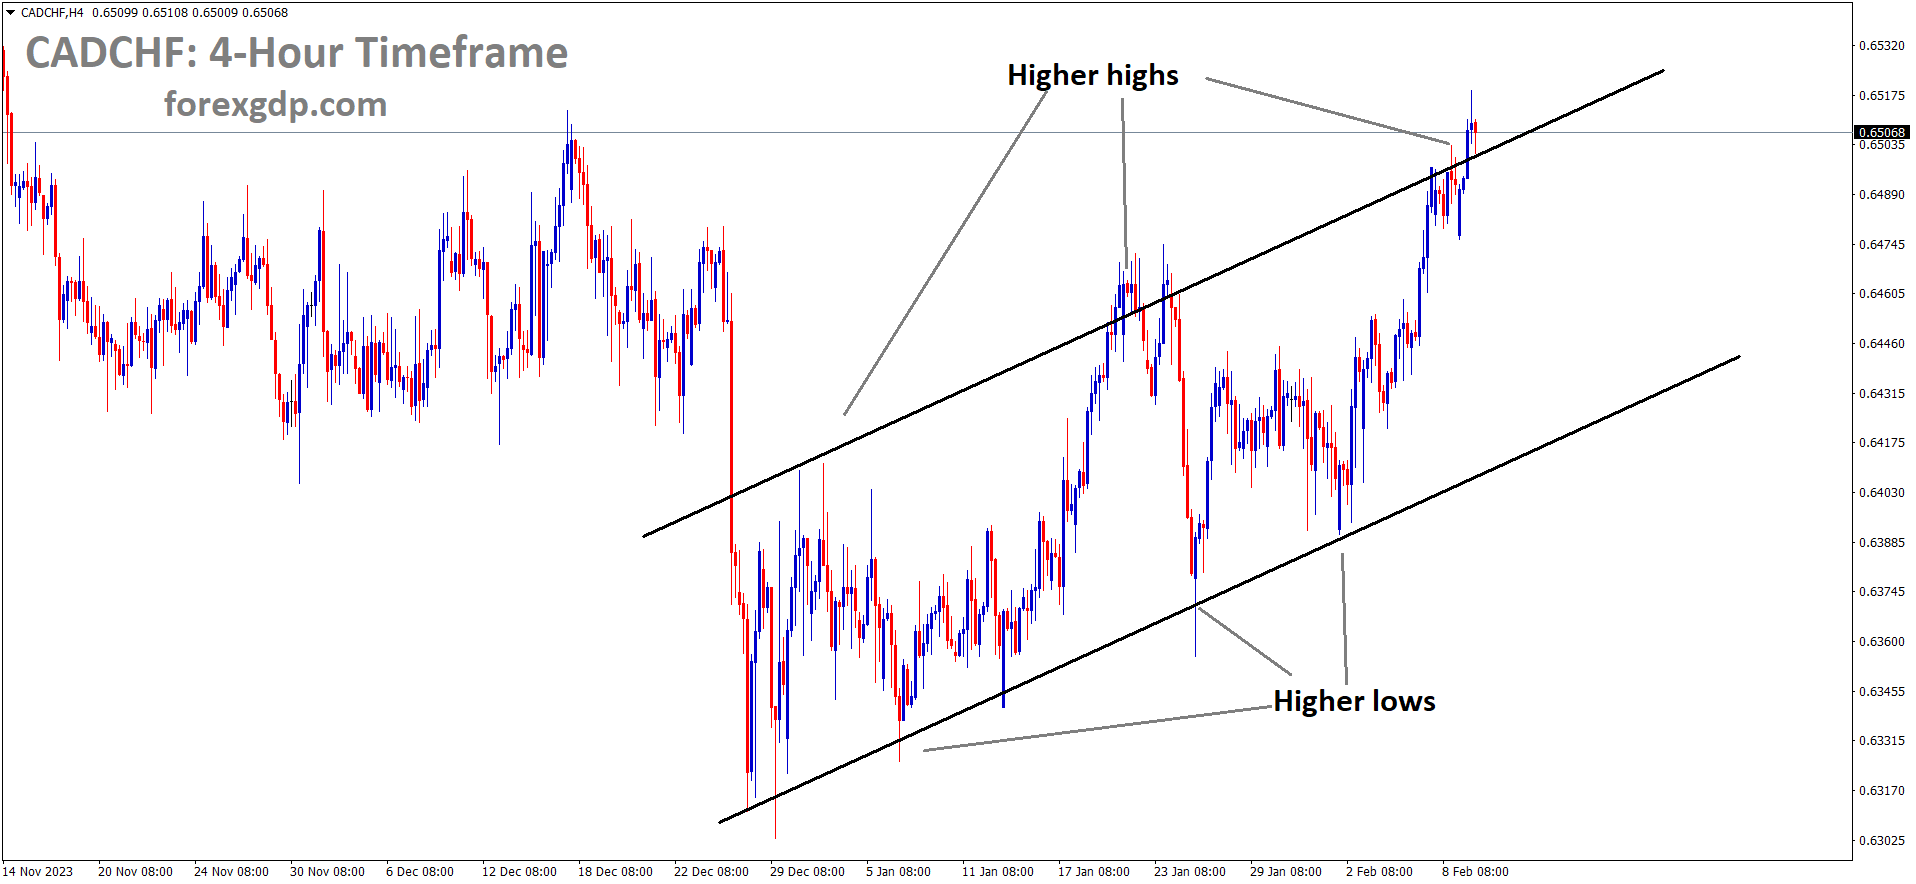 CADCHF is moving in Ascending channel and market has reached higher high area of the channel